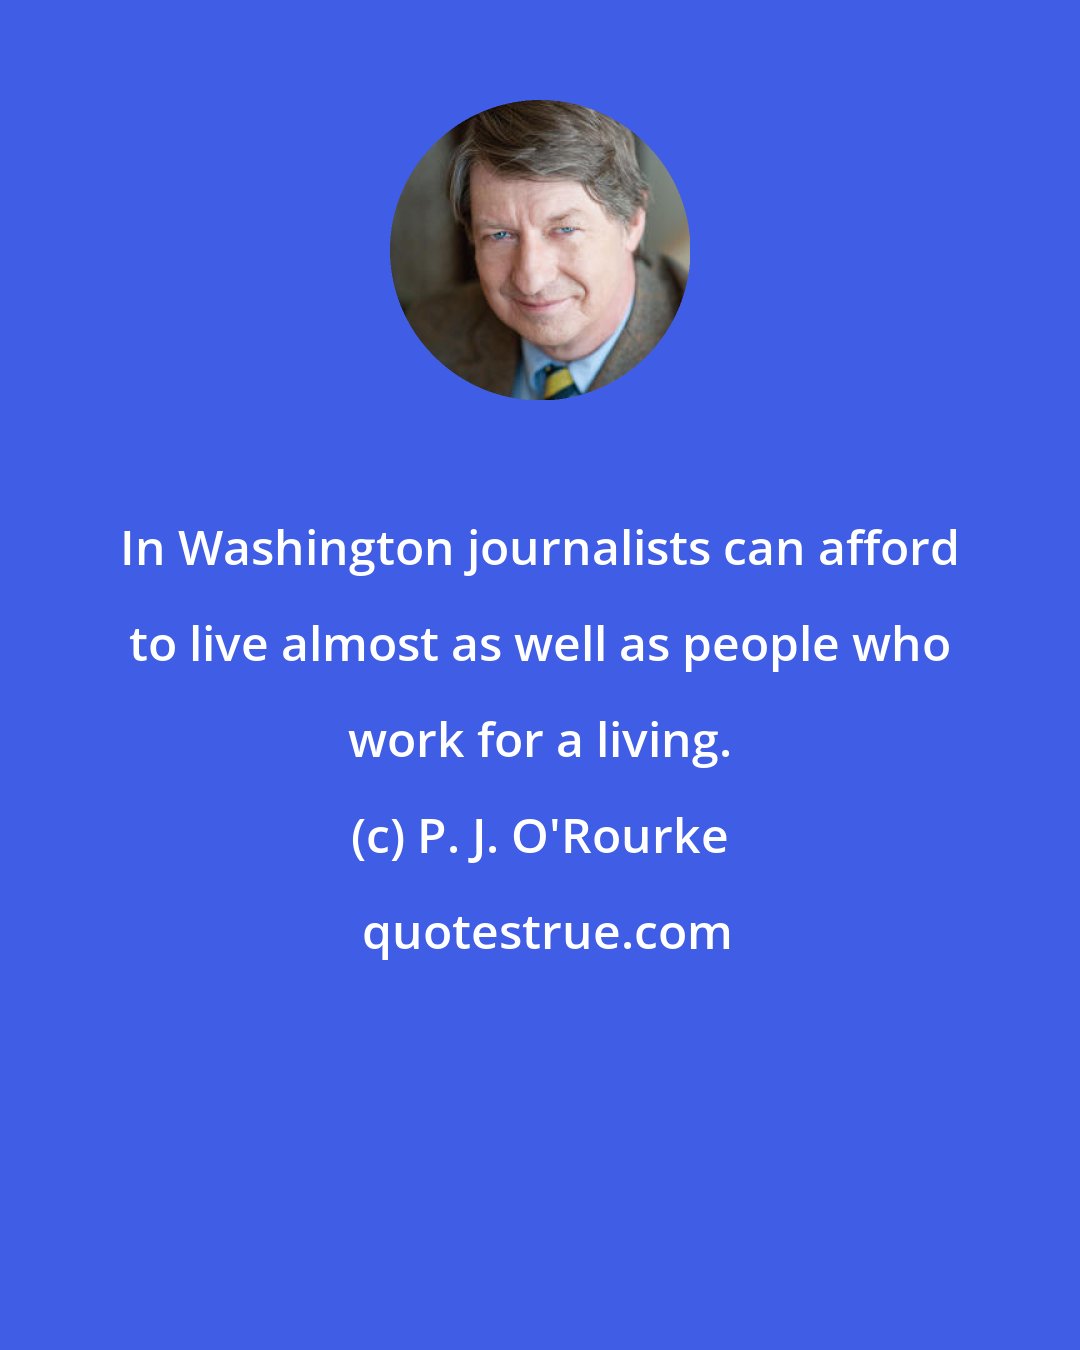 P. J. O'Rourke: In Washington journalists can afford to live almost as well as people who work for a living.